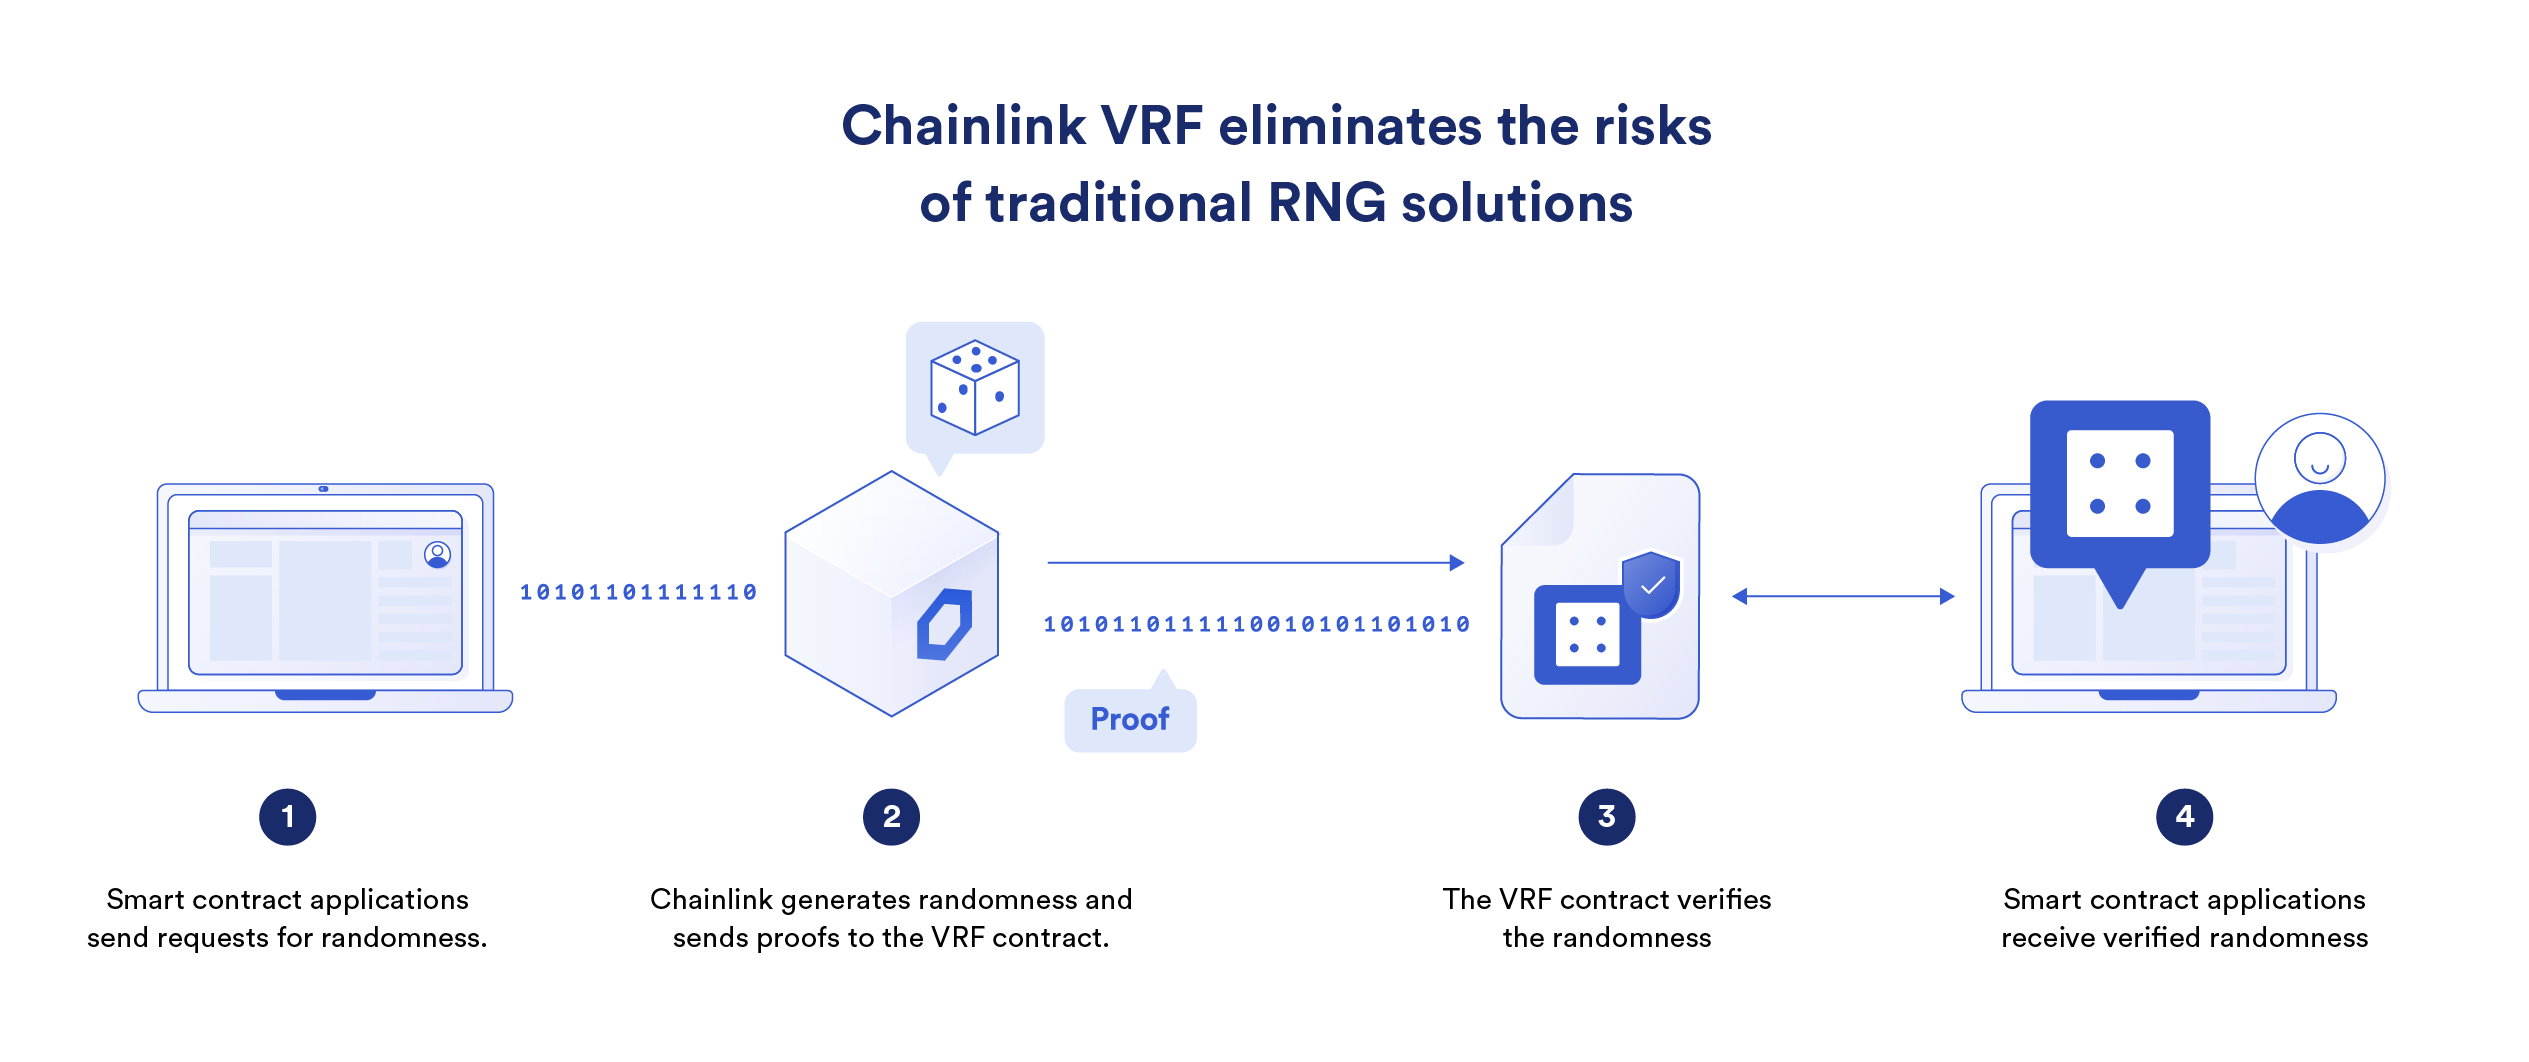 Chainlink VRF for enterprise giveaways and marketing campaigns